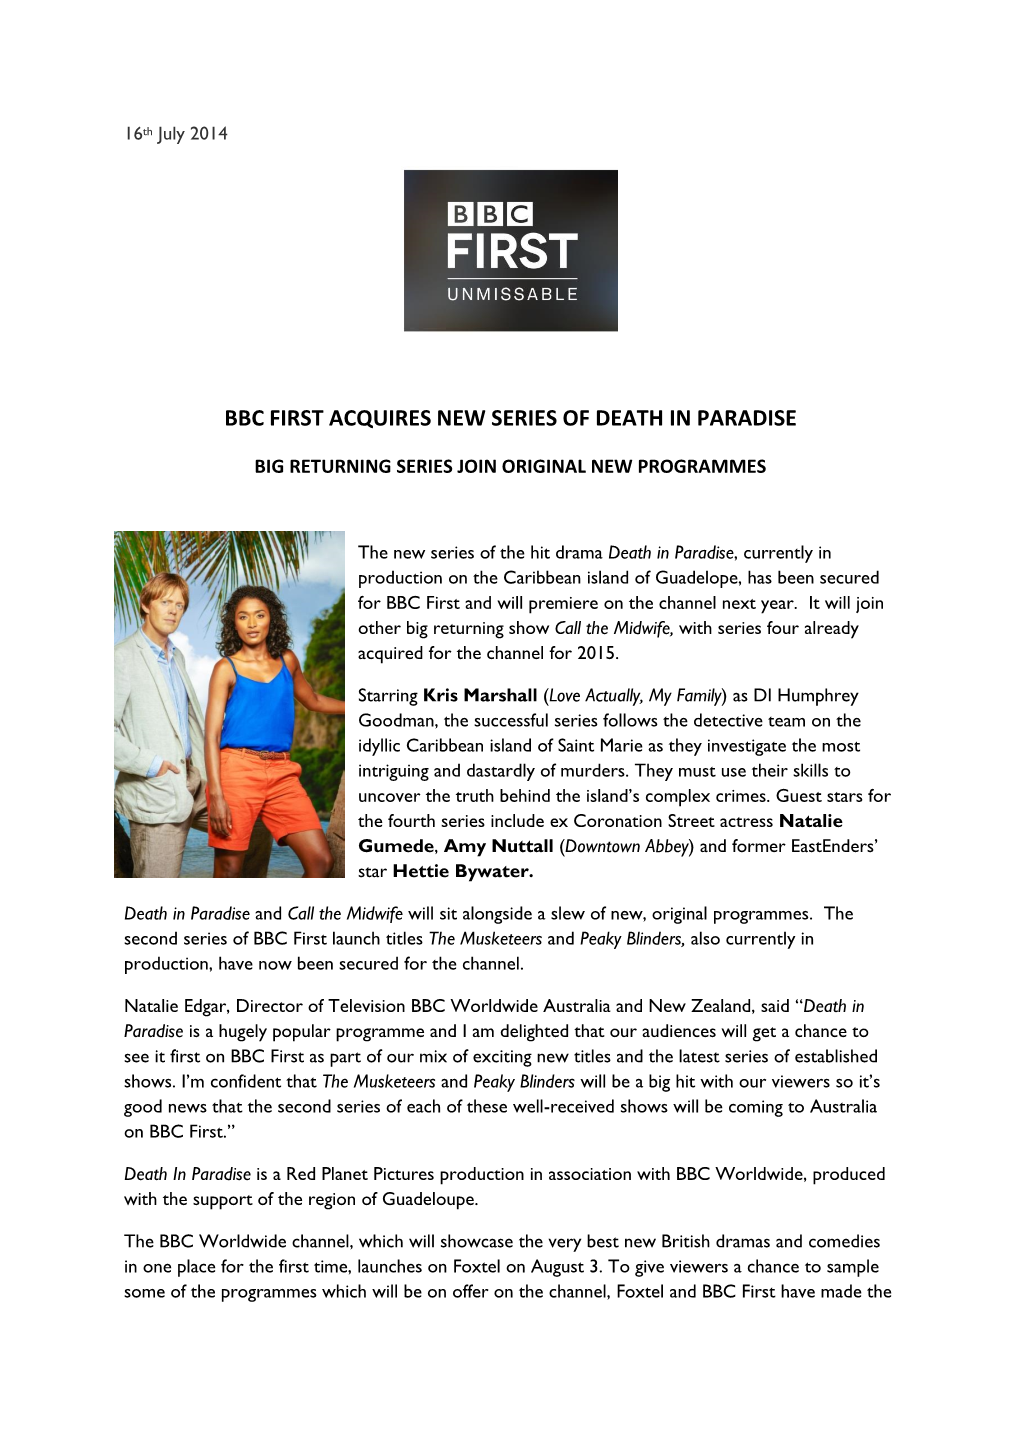 Bbc First Acquires New Series of Death in Paradise